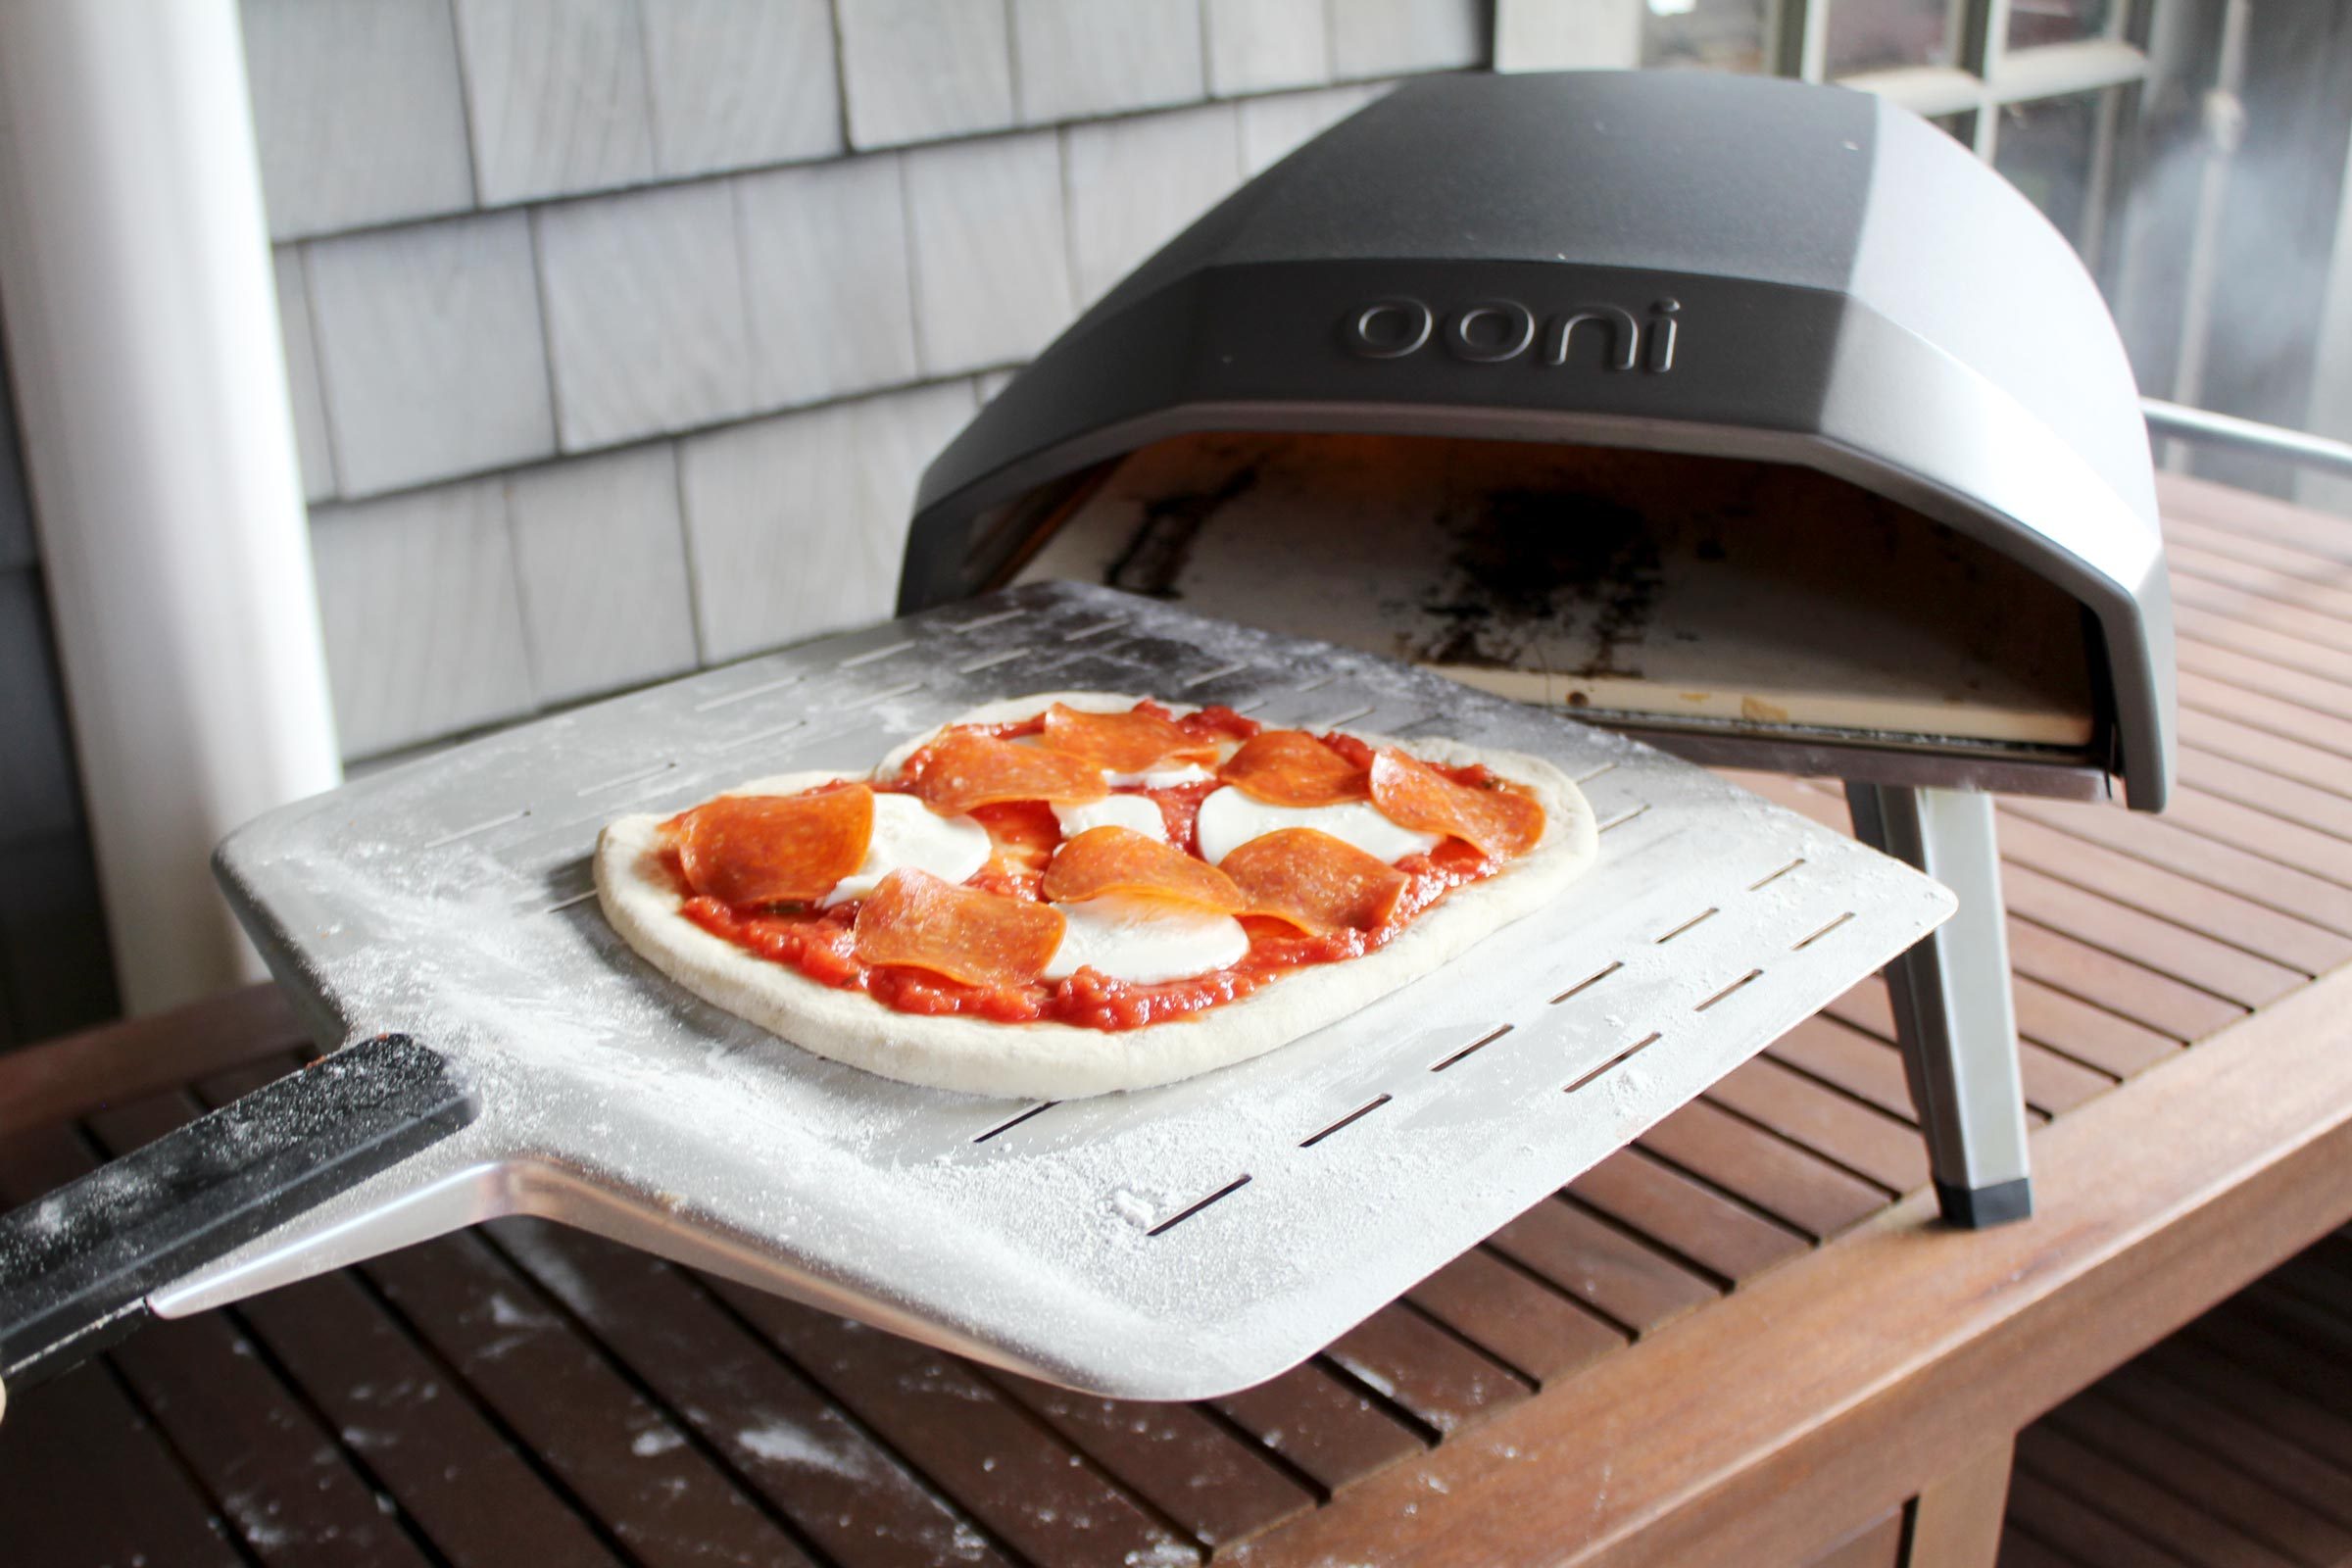 https://www.tasteofhome.com/wp-content/uploads/2022/08/TOH-Launching-ooni-pizza-oven-social-Camryn-Rabideau-for-Taste-of-Home.jpg?fit=680%2C454